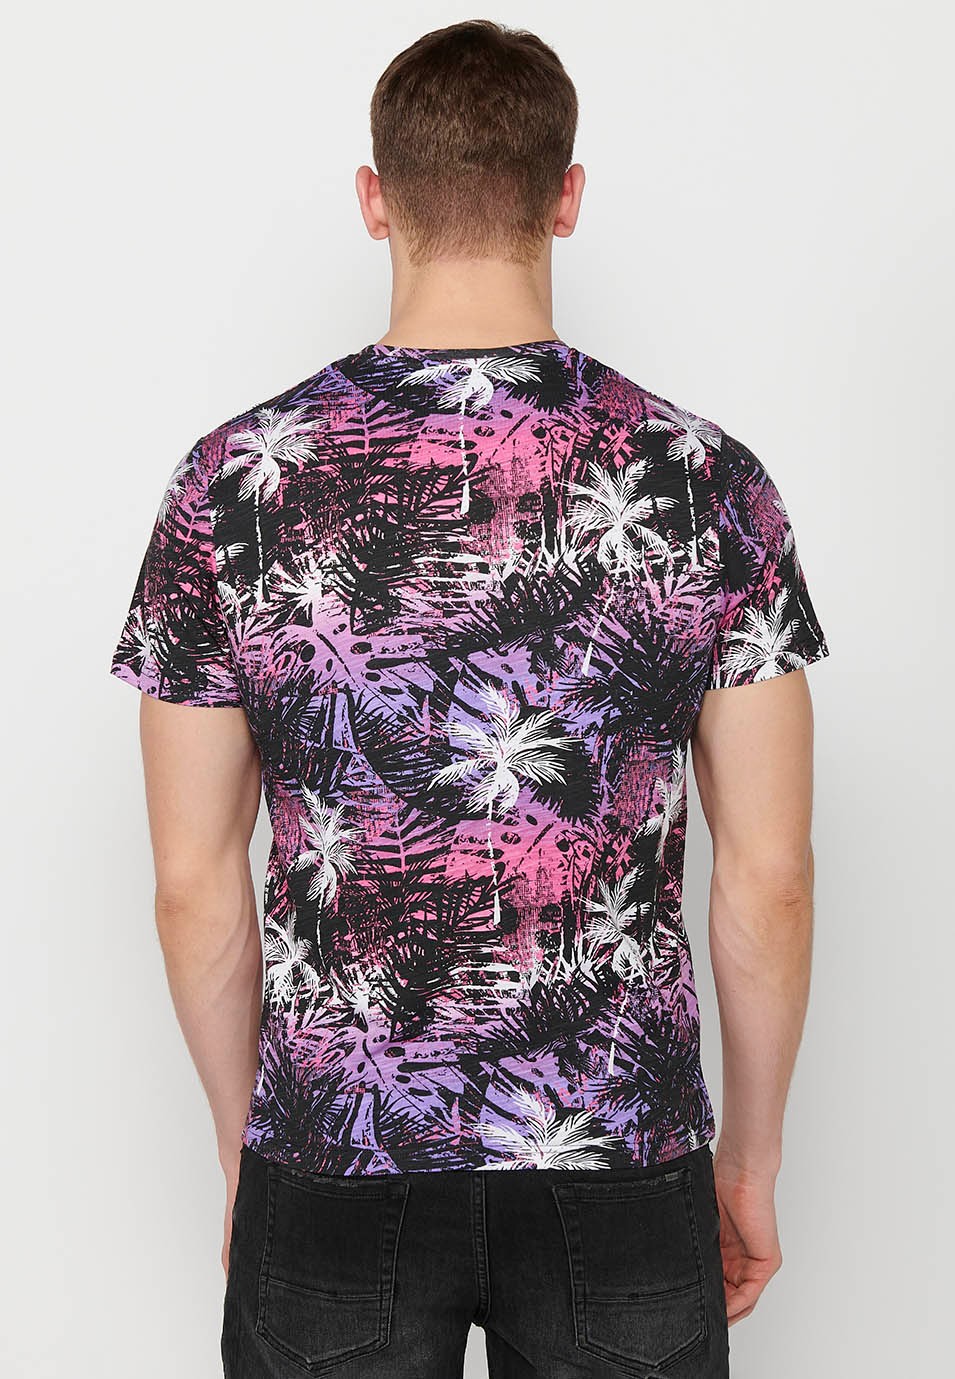 Short-sleeved cotton t-shirt with multicolored pink-purple tropical print for men